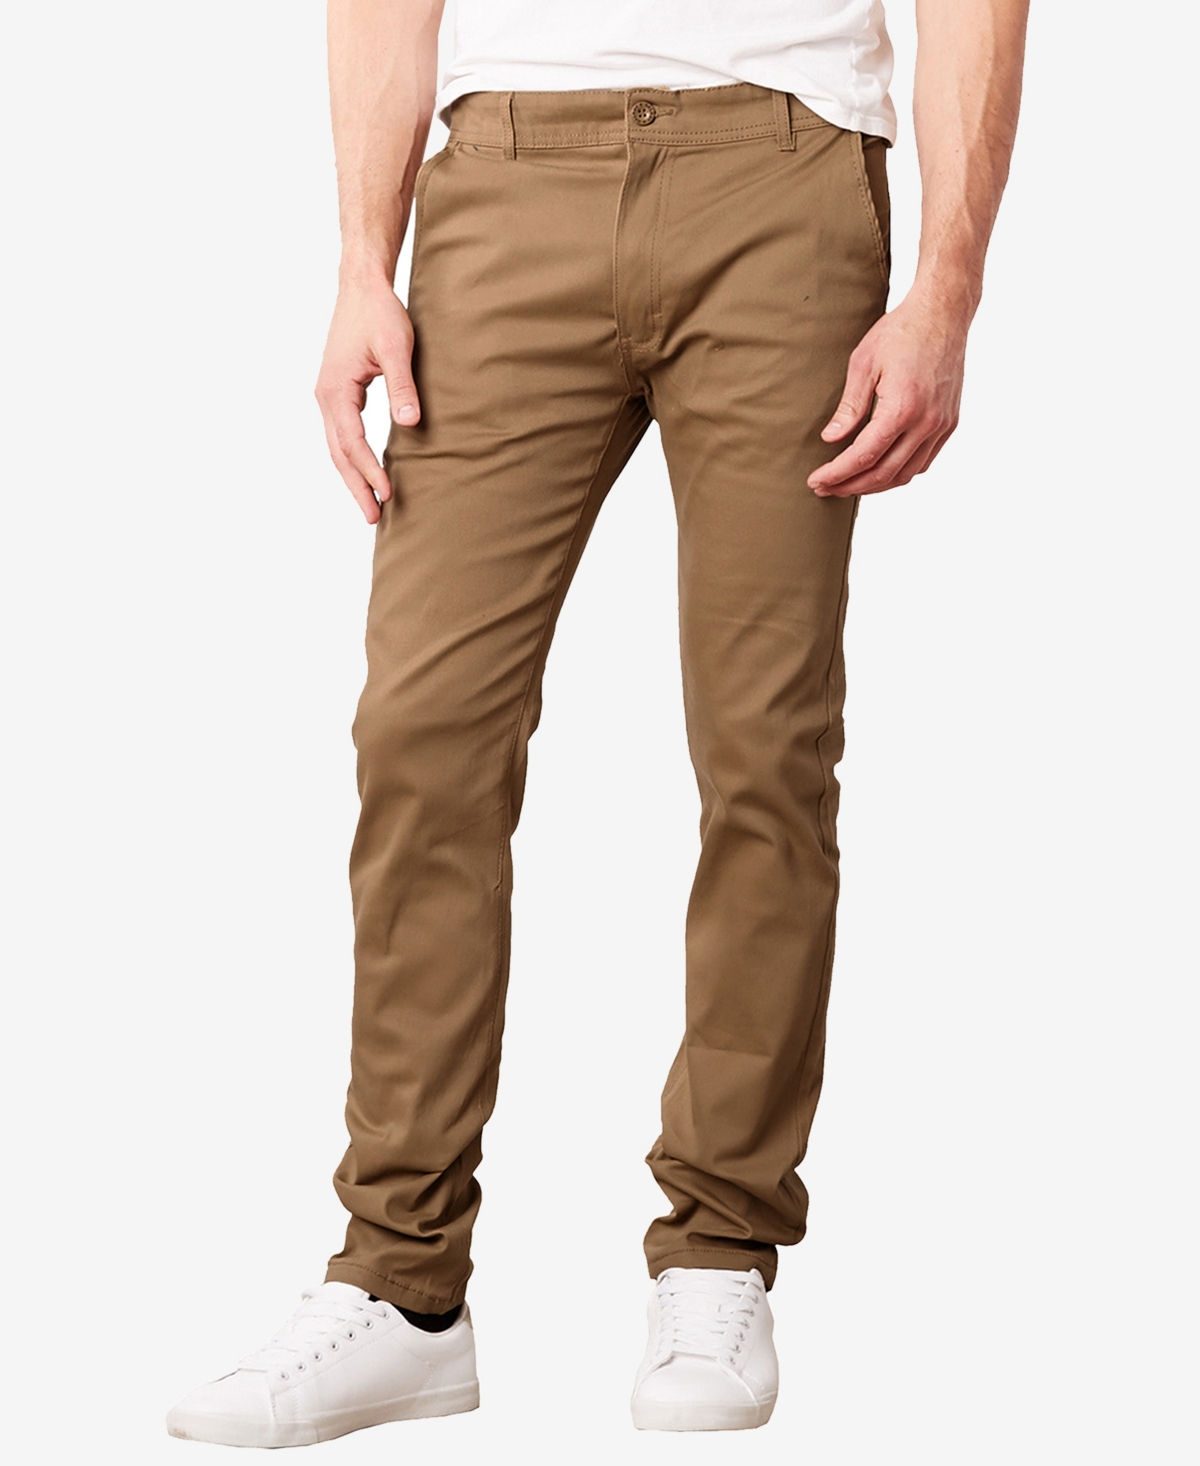 Galaxy By Harvic Men's Super Stretch Slim Fit Everyday Chino Pants In Dark Khaki